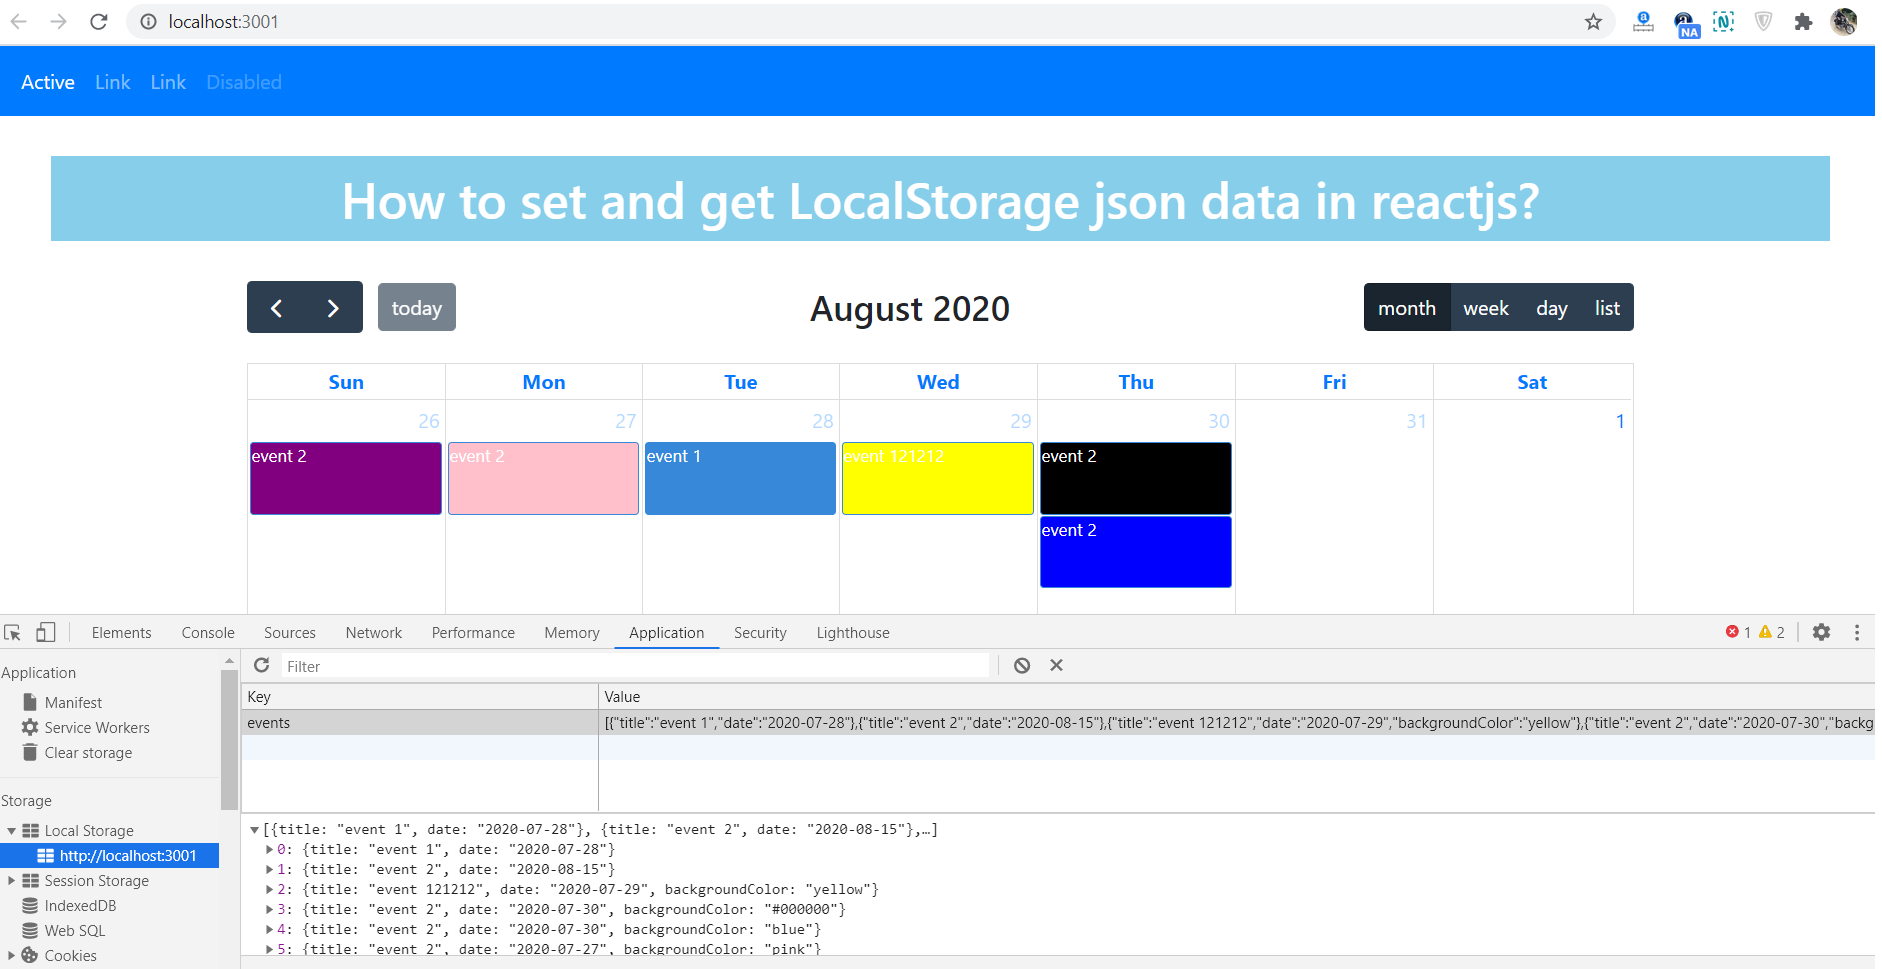 How to set and get LocalStorage json data in reactjs?